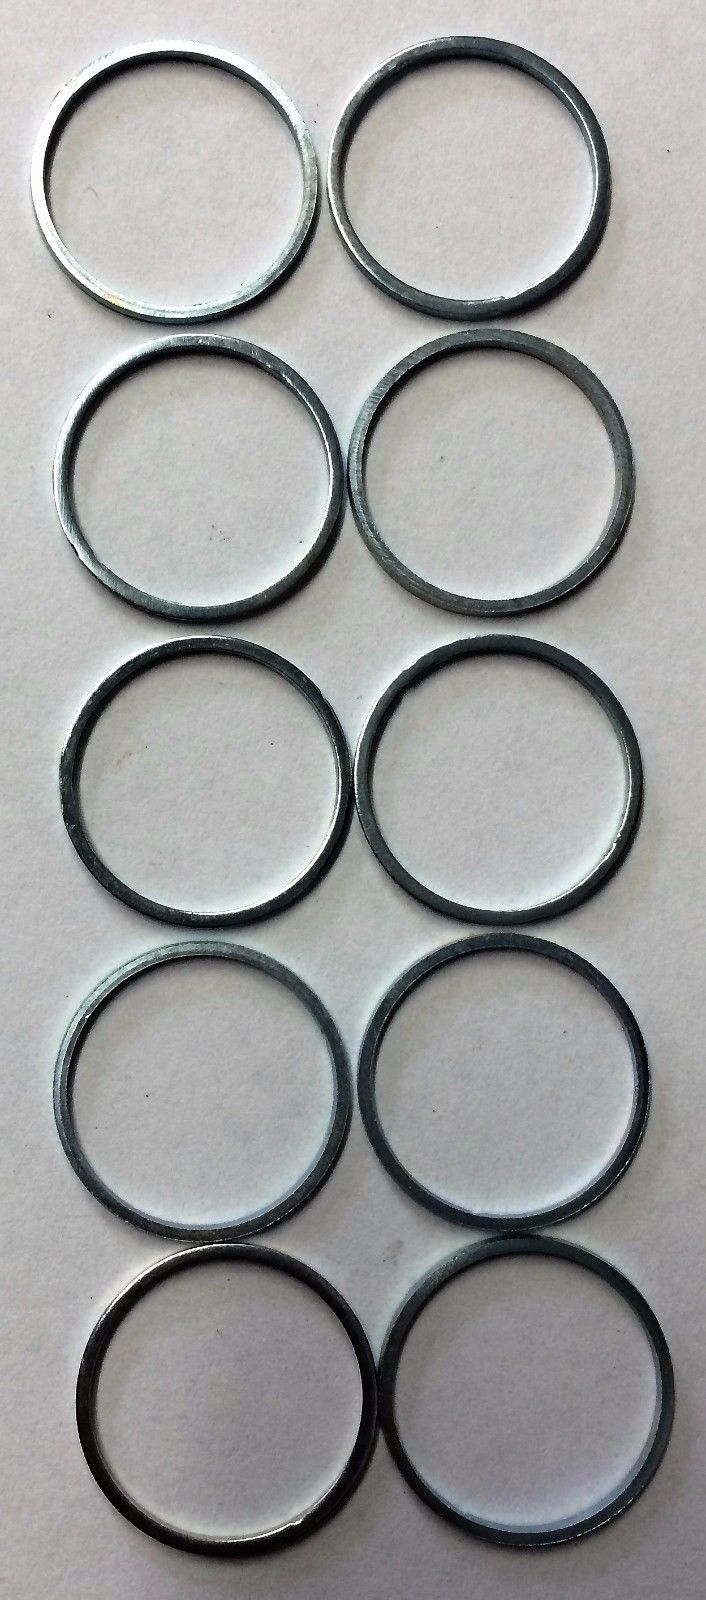 Bosch Reduction Ring For Diamond Blades 7/8" to 20mm 2610014225 (10pcs)